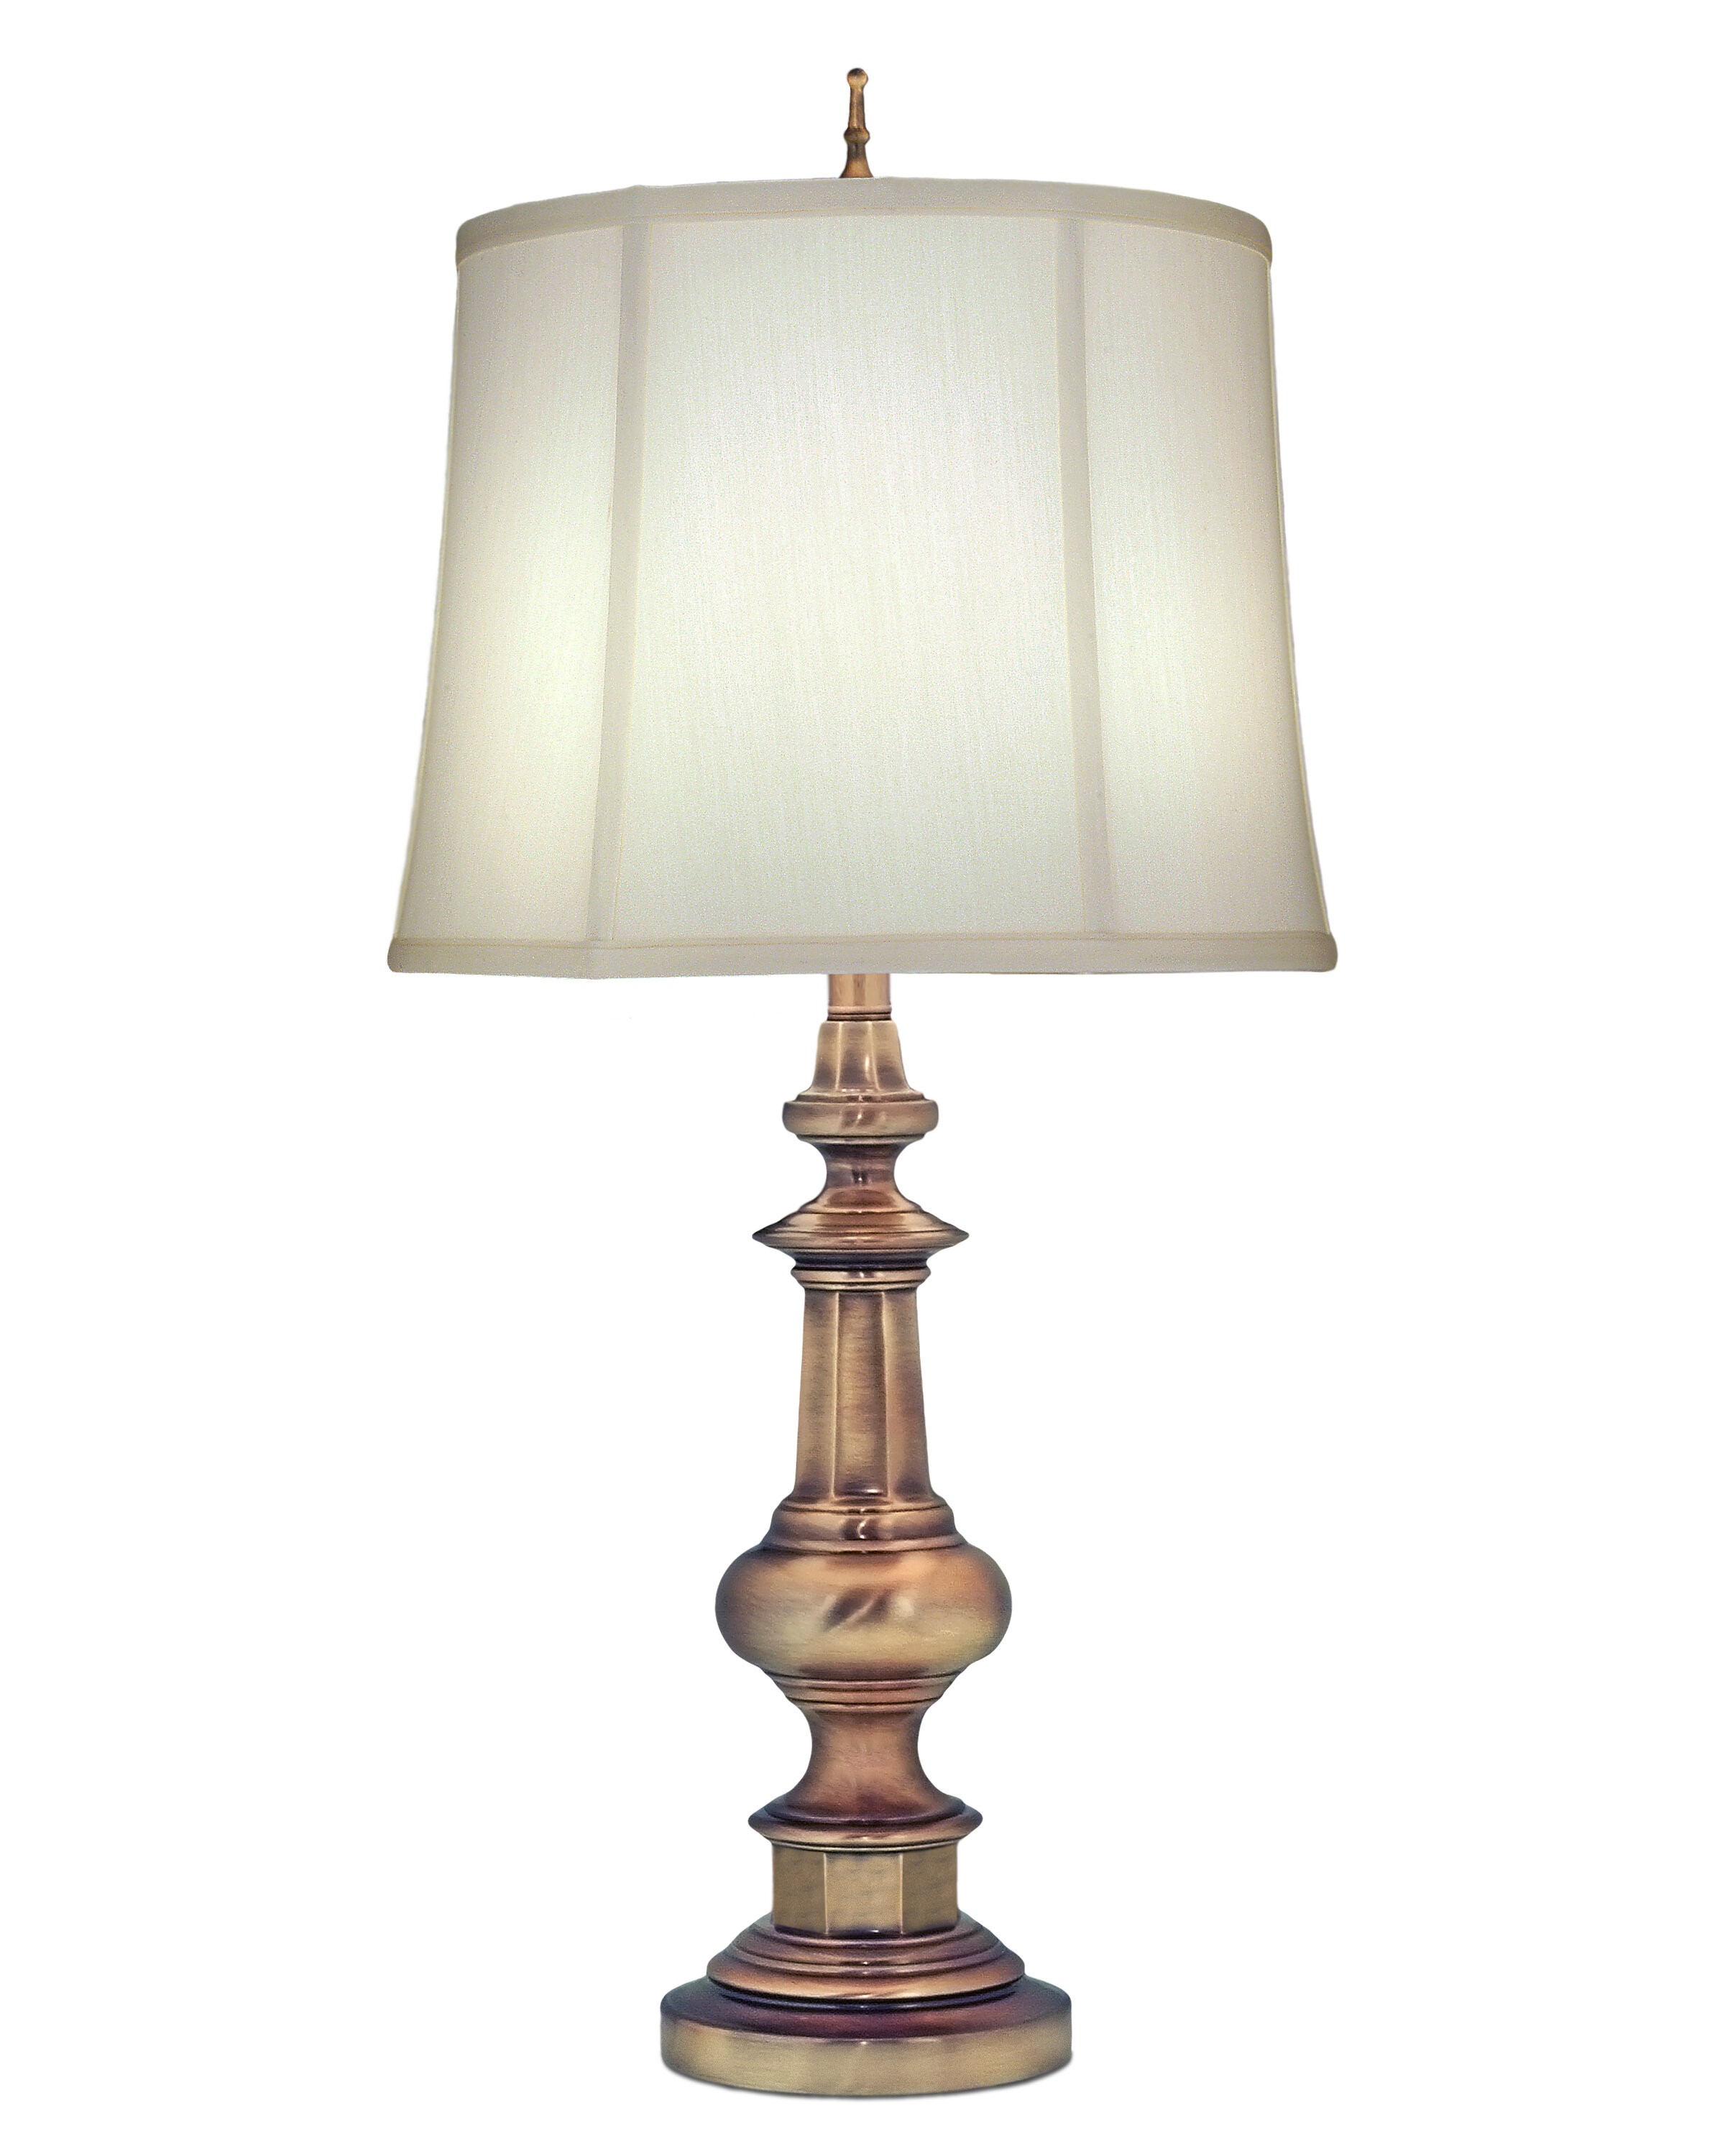 33" Table Lamp with Drum Shade